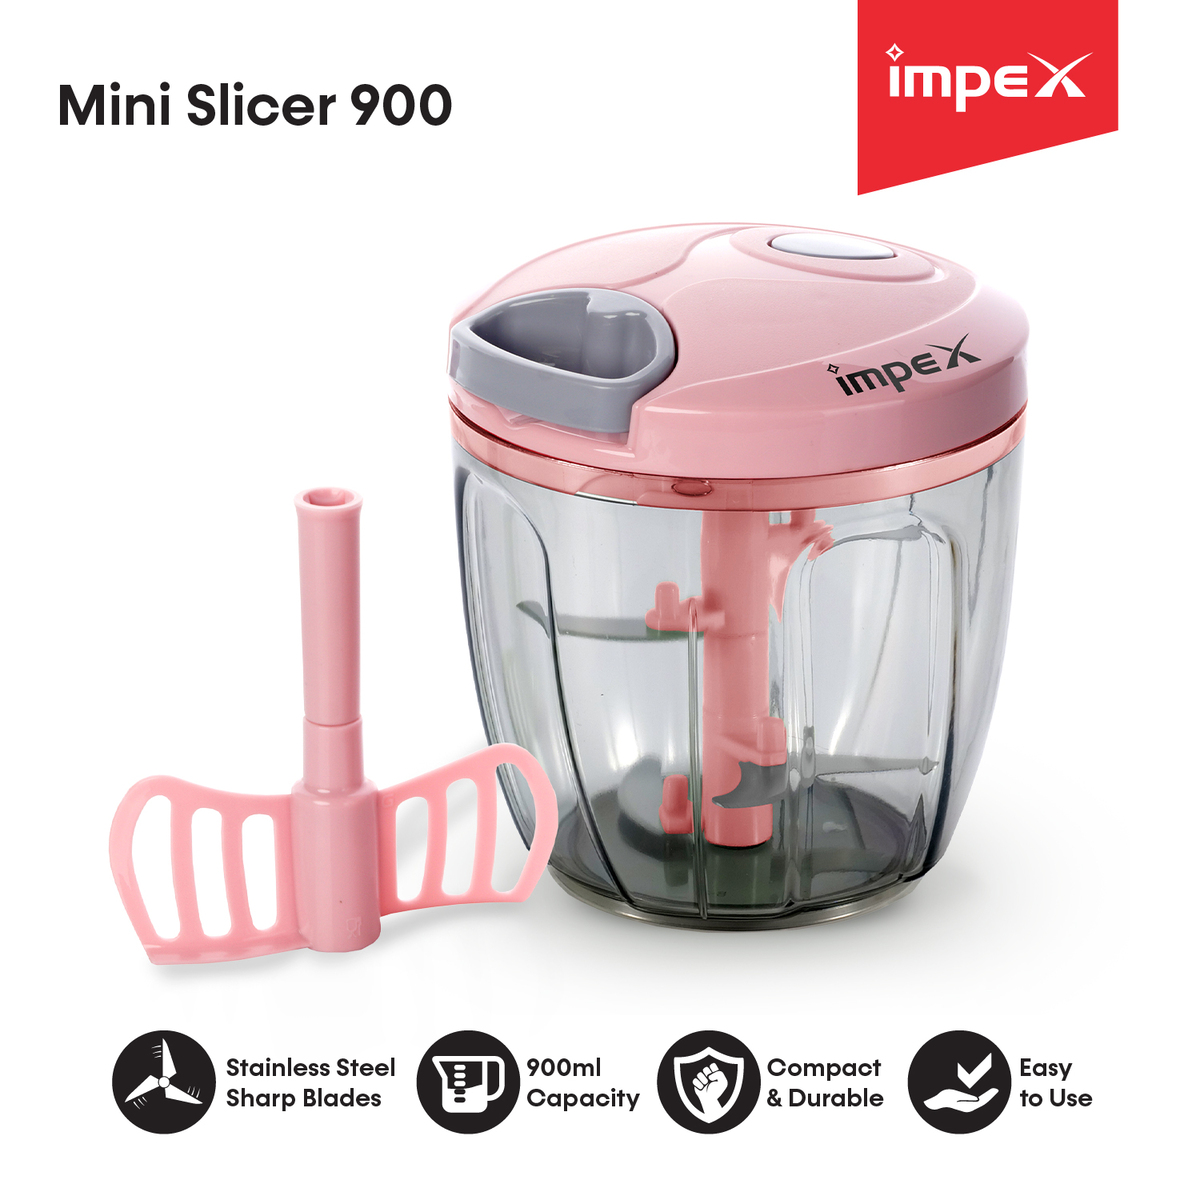 Impex MS 900 ml Mini Slicer with Stainless Steel Sharp Blades